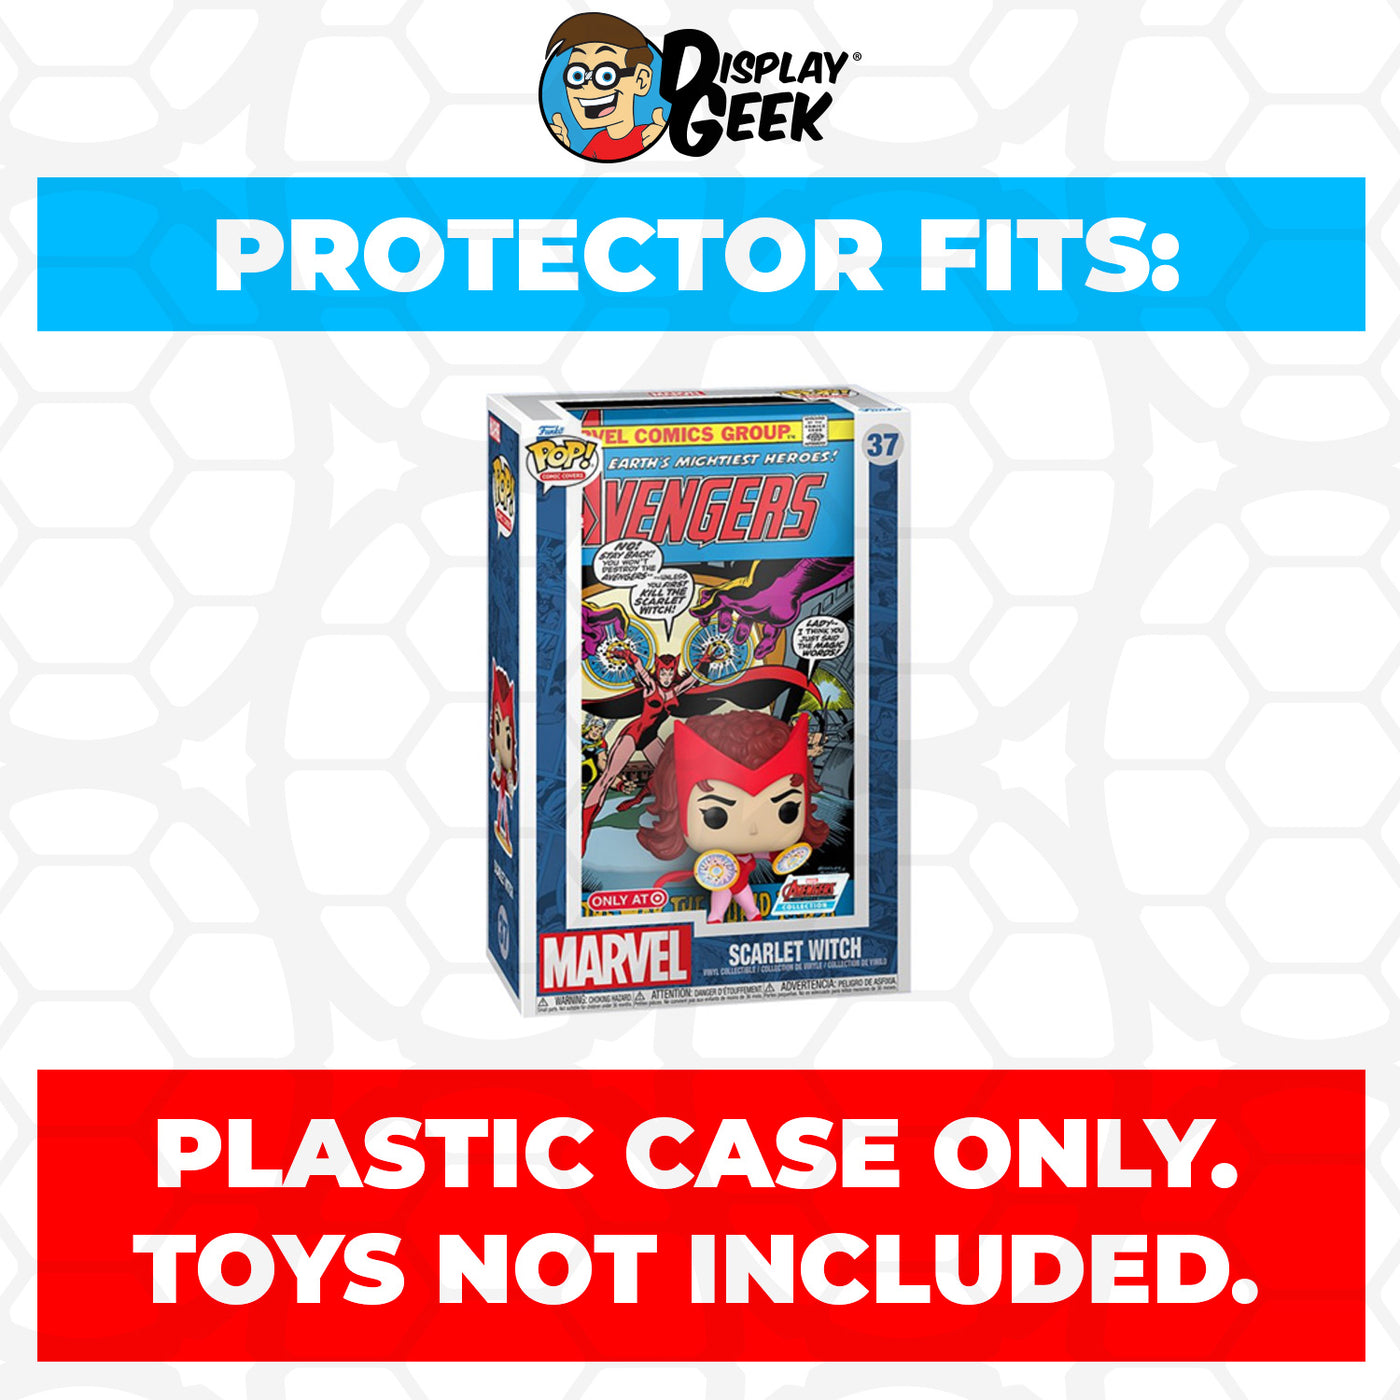 Pop Protector for Scarlet Witch #37 Funko Pop Comic Covers on The Protector Guide App by Display Geek